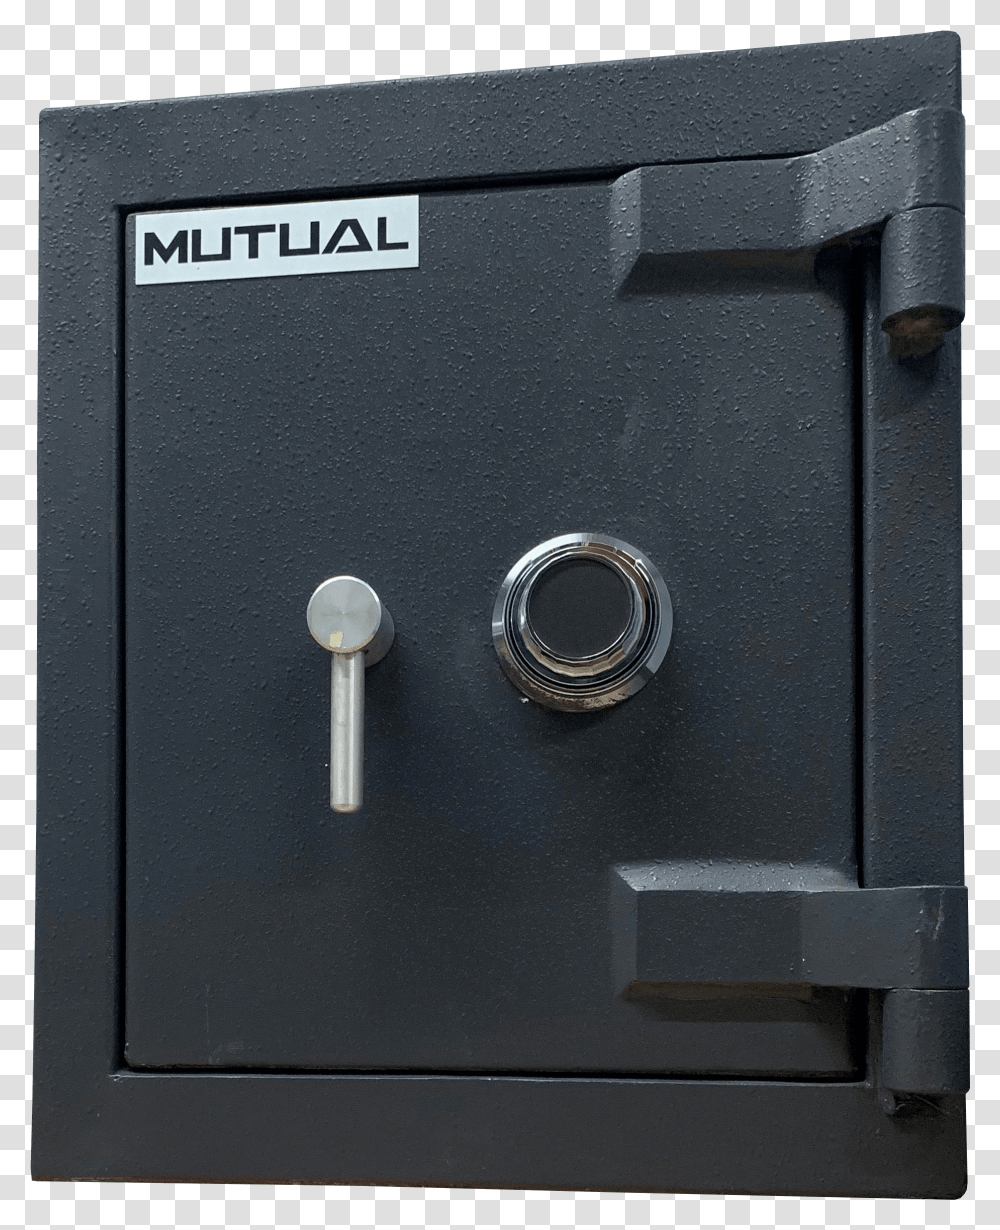 Mutual As 1 Tl15 Composite High Security Burglar & Fire Safe Lever, Mailbox, Letterbox Transparent Png